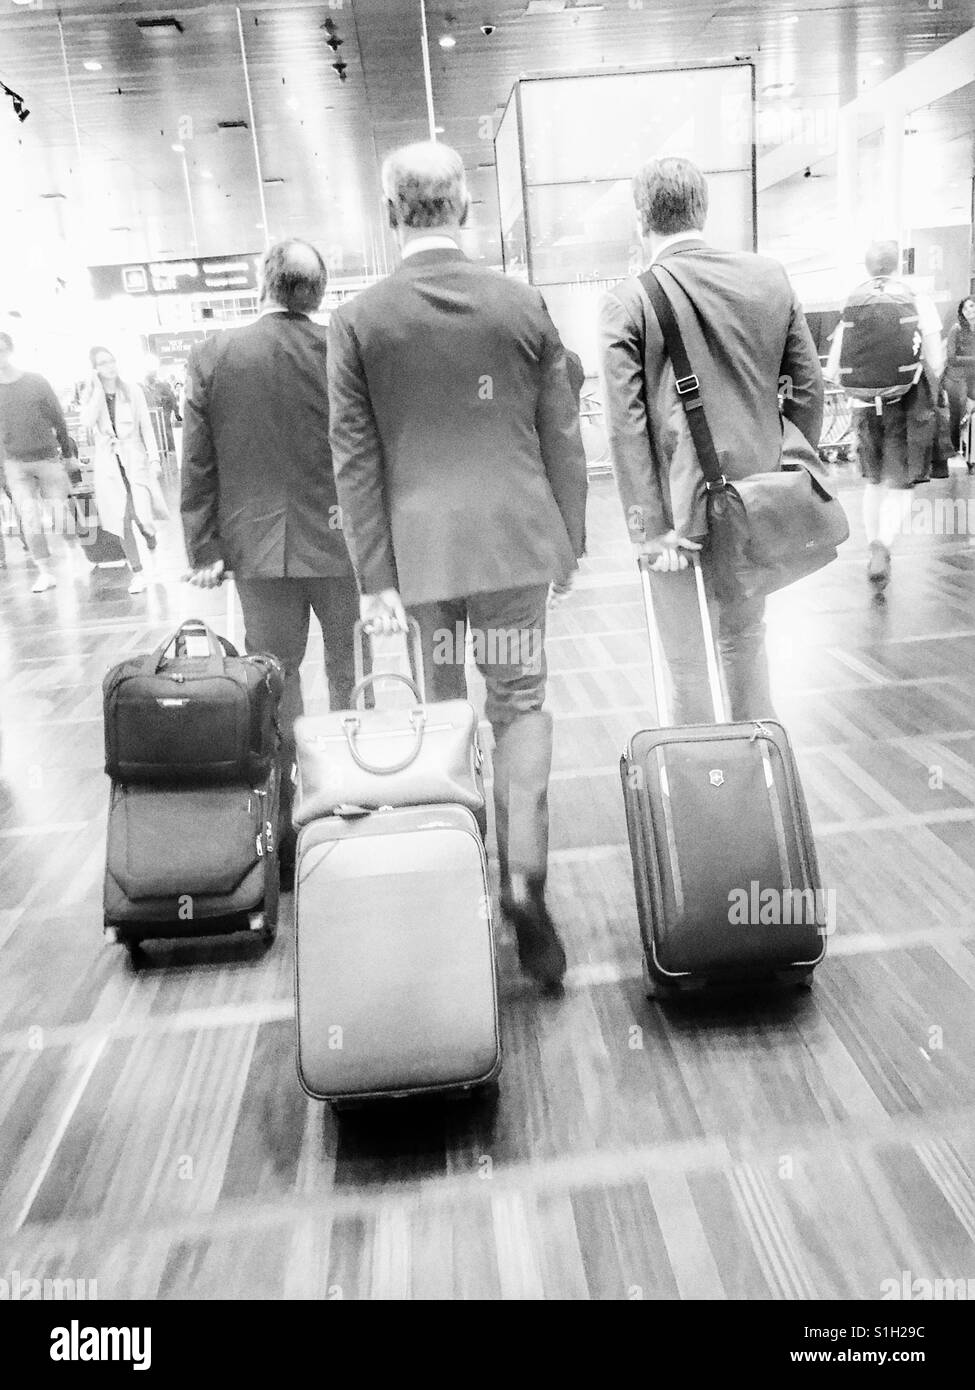 Business men at an airport Stock Photo